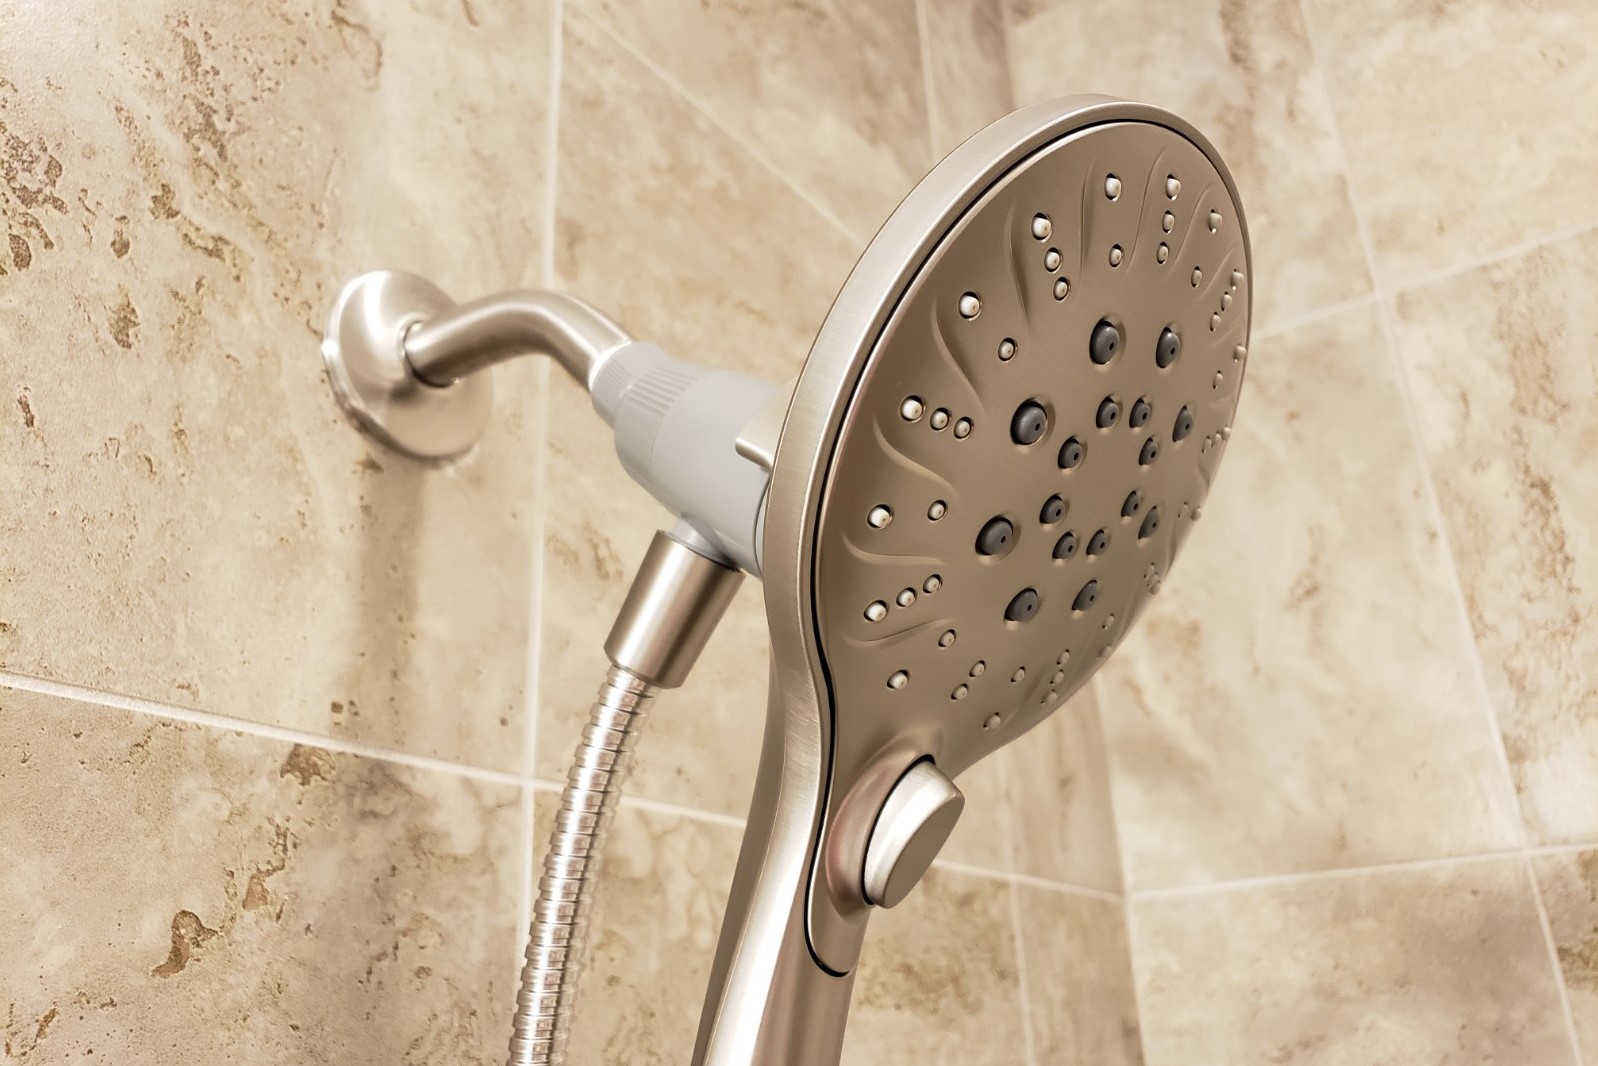 How to Upgrade Your Shower Head